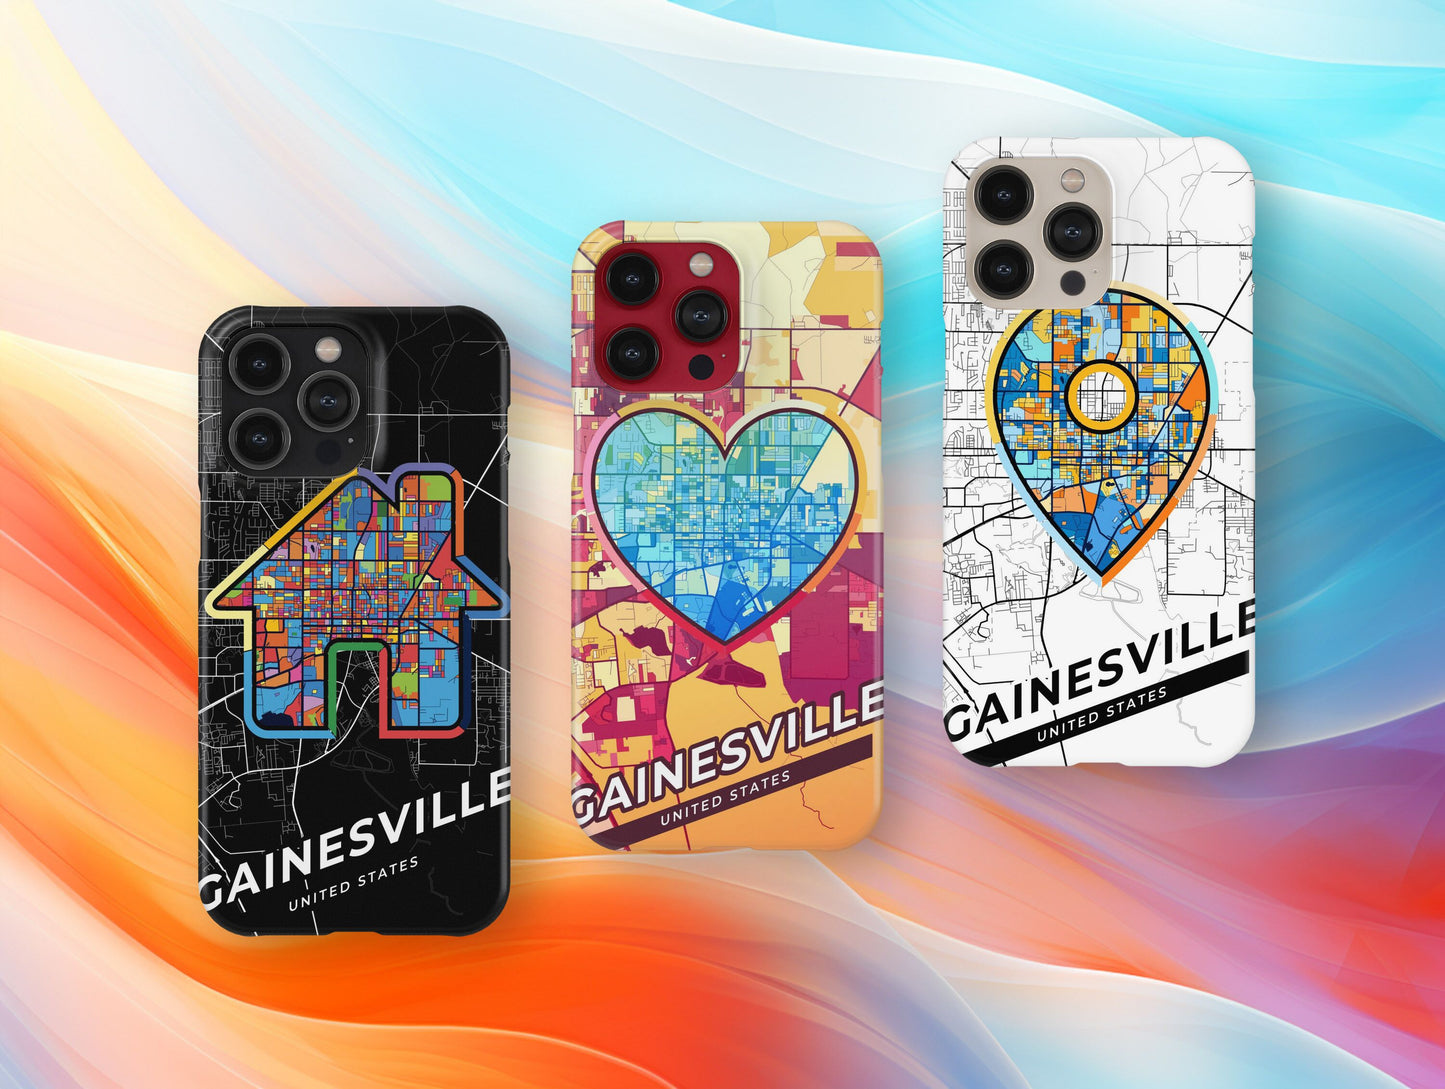 Gainesville Florida slim phone case with colorful icon. Birthday, wedding or housewarming gift. Couple match cases.